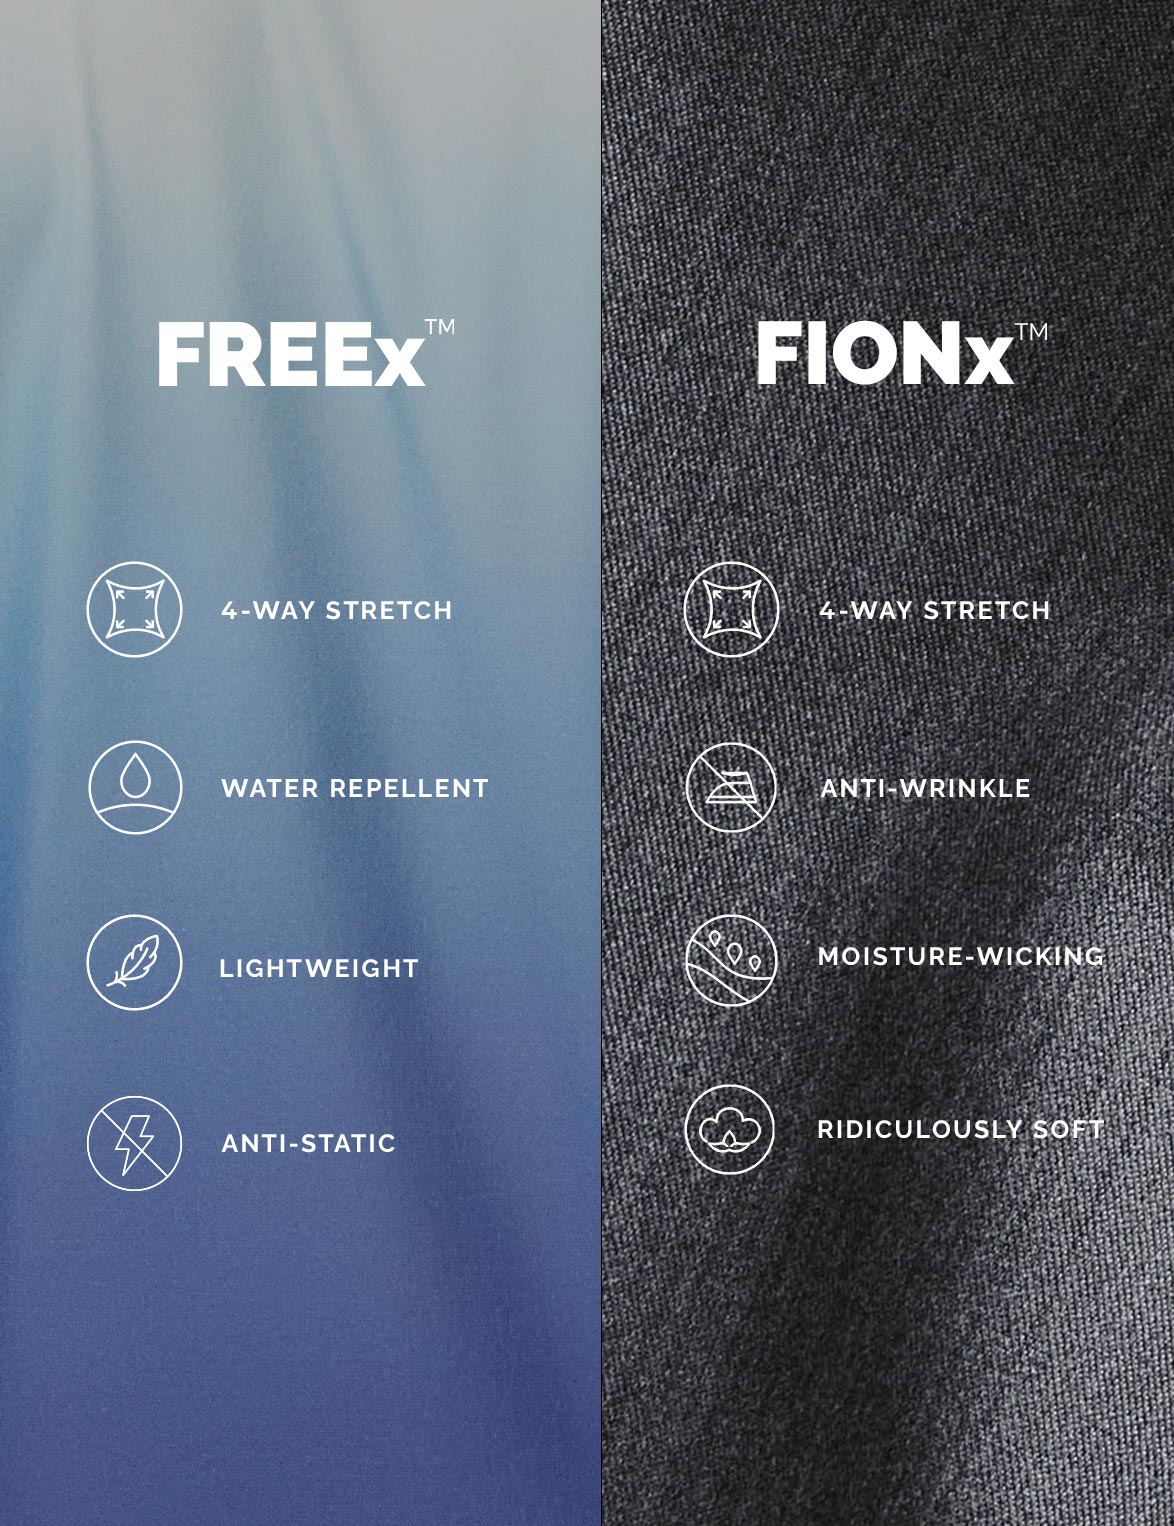 Made from recycled polyester fibers, our FREEx™ scrubwear fabrication is lightweight, anti-static (like pet hair) and water repellent with four-way stretch.